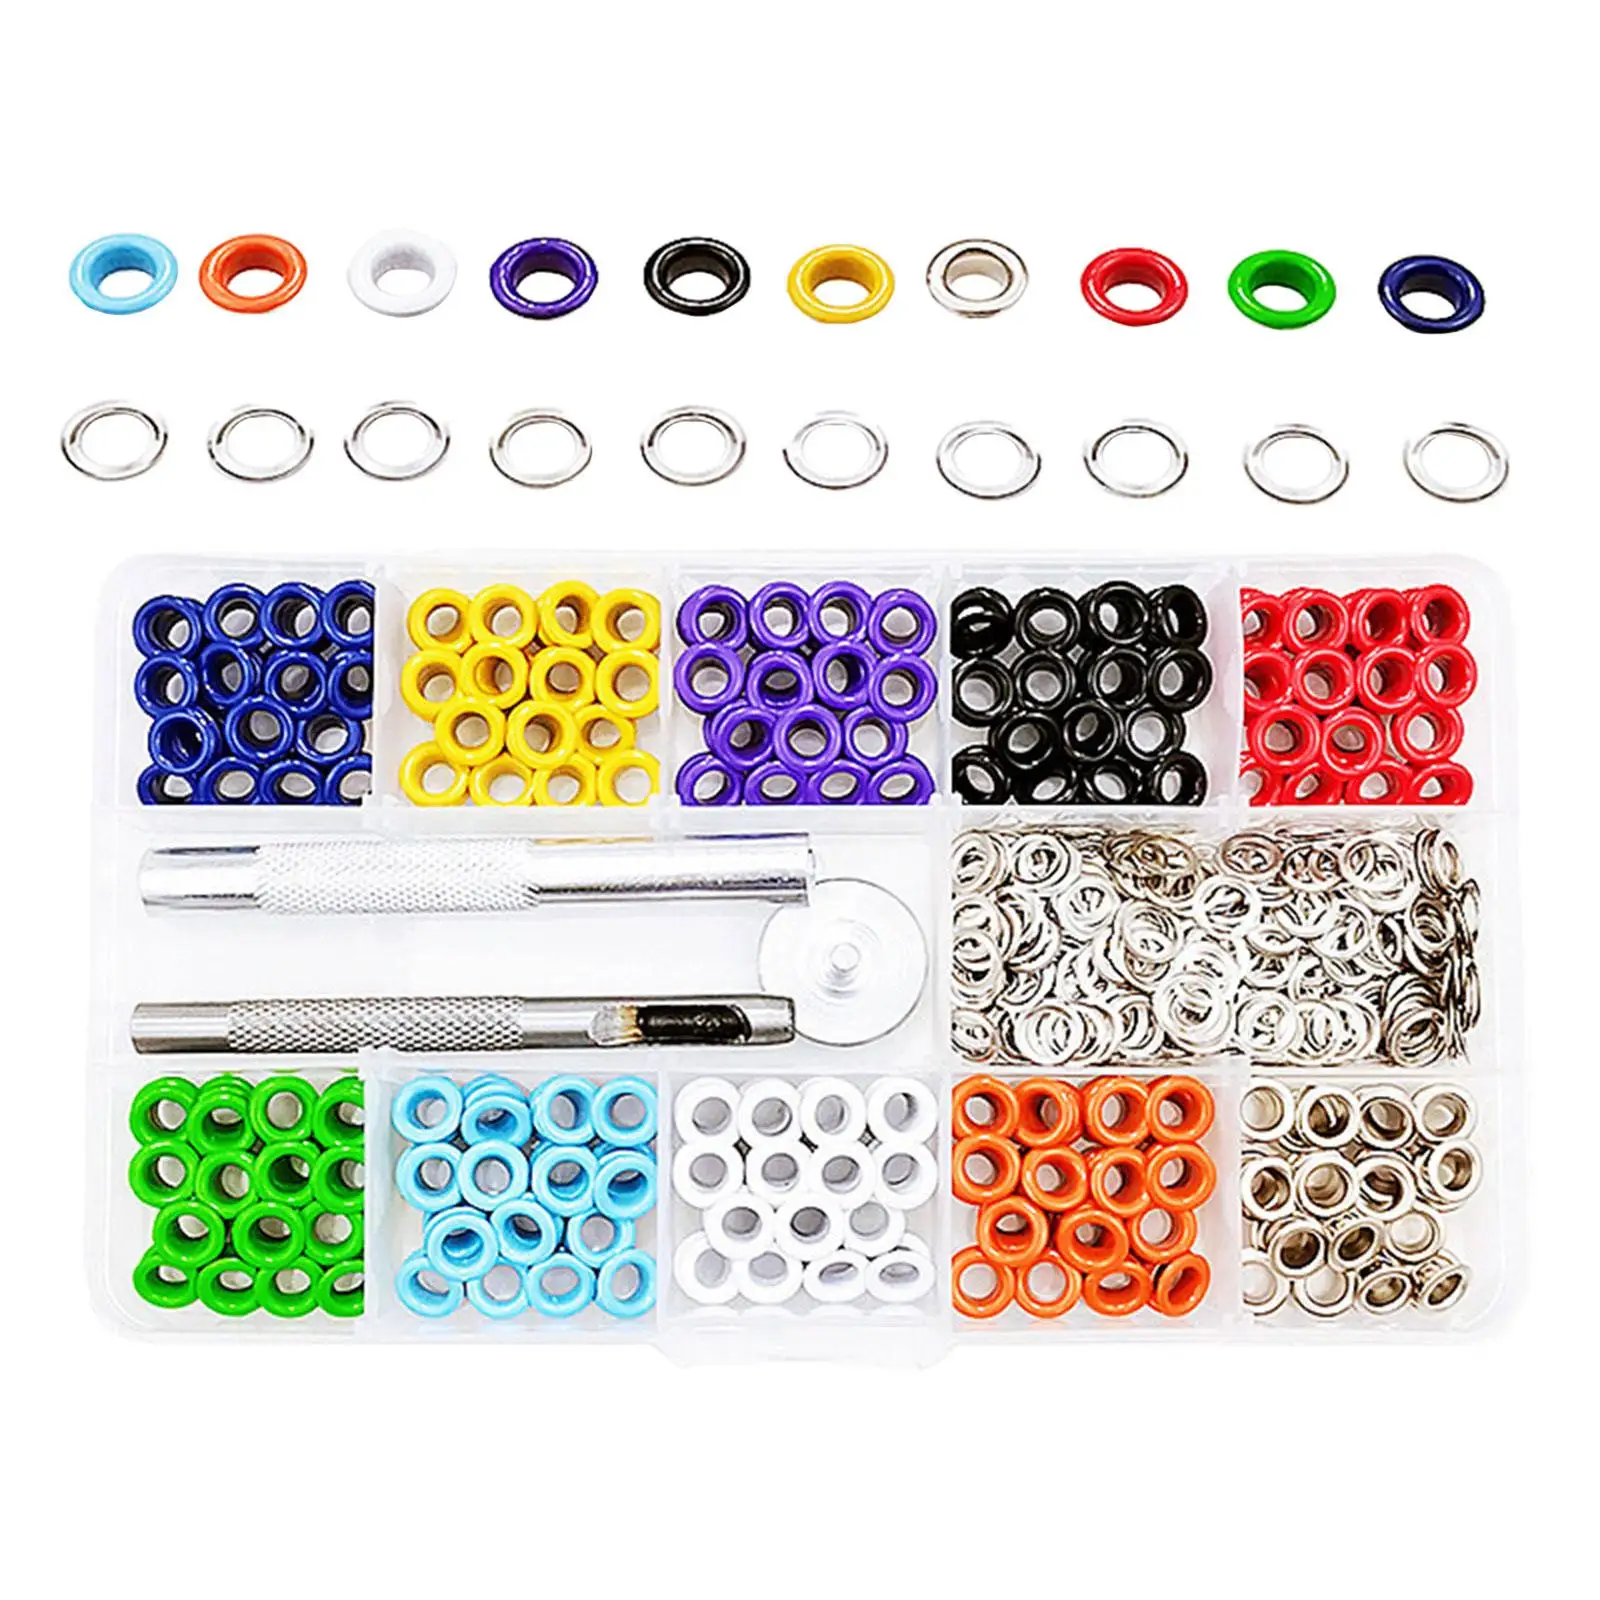 Grommet Tool Kit with Washers Metal Eyelets Grommet Kit Setting Tool for Fabrics Handbag Marine Canvas Paper Crafts Canvas